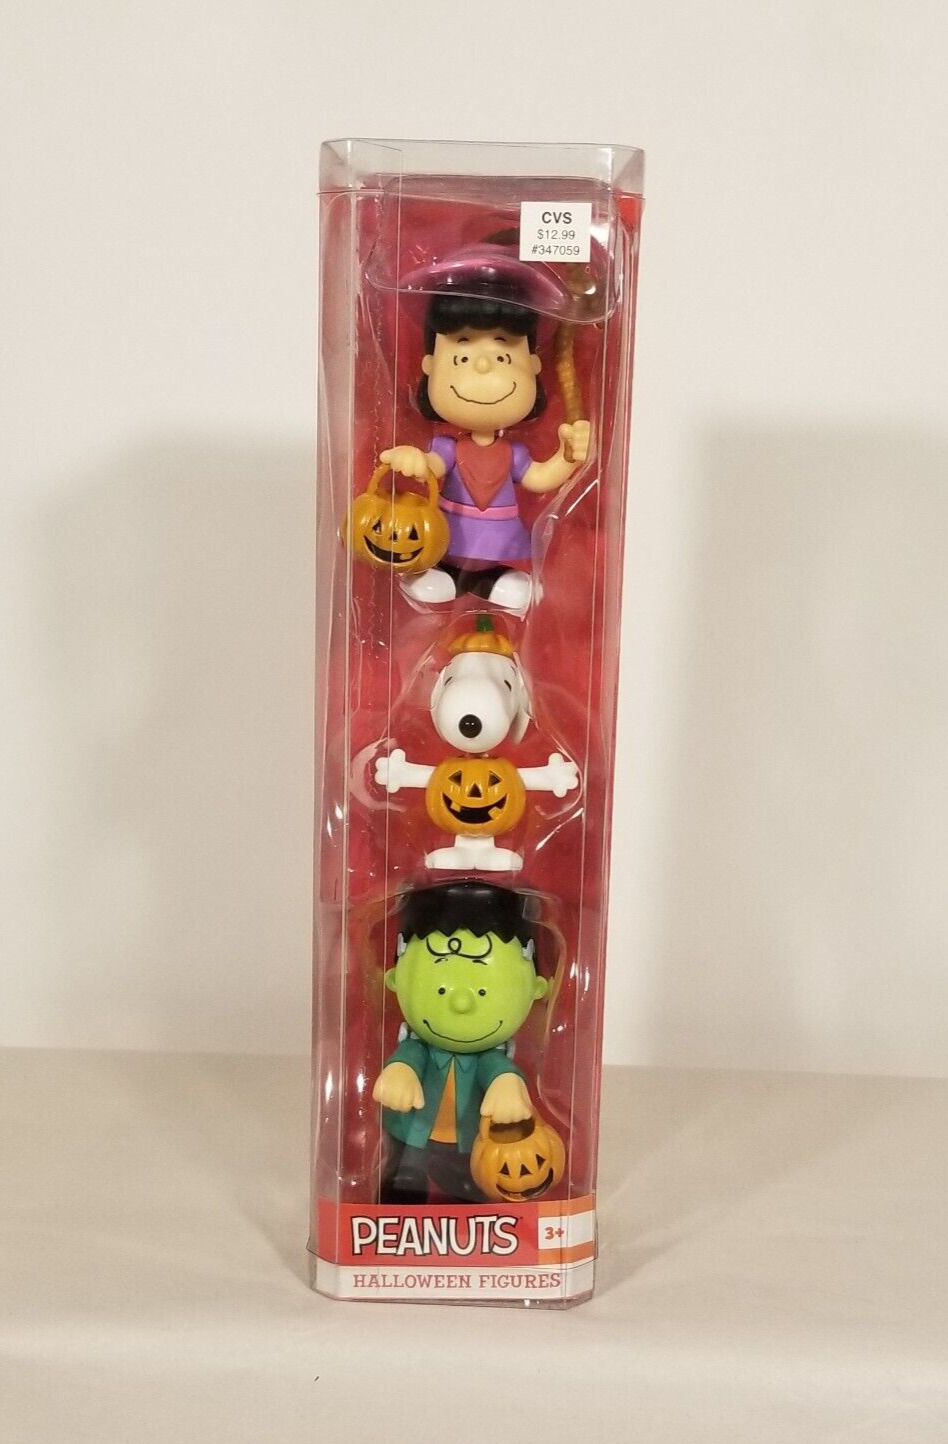 Peanuts Halloween Figures Set of 3 Snoopy Charlie Brown Lucy 2017